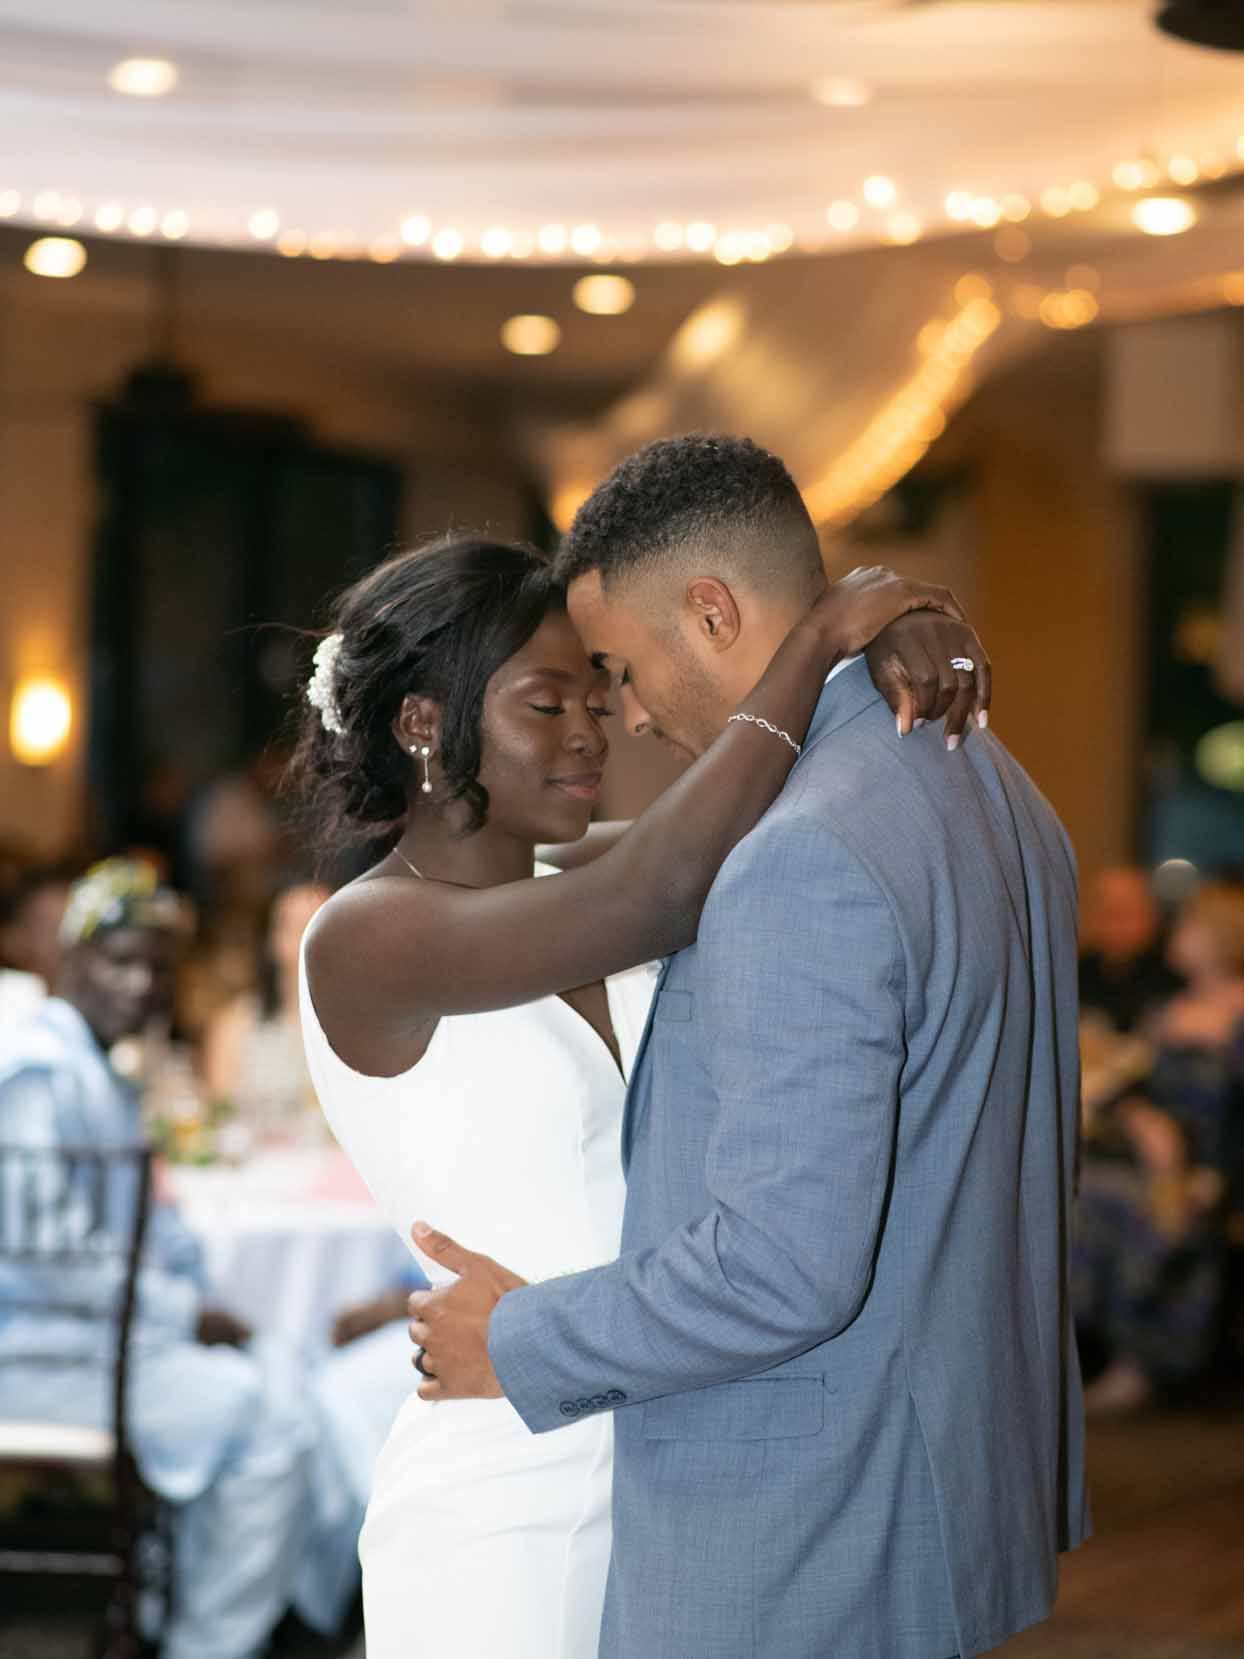 Enyo & Etienne Share a Romantic First Dance at Palm Valley, AZ